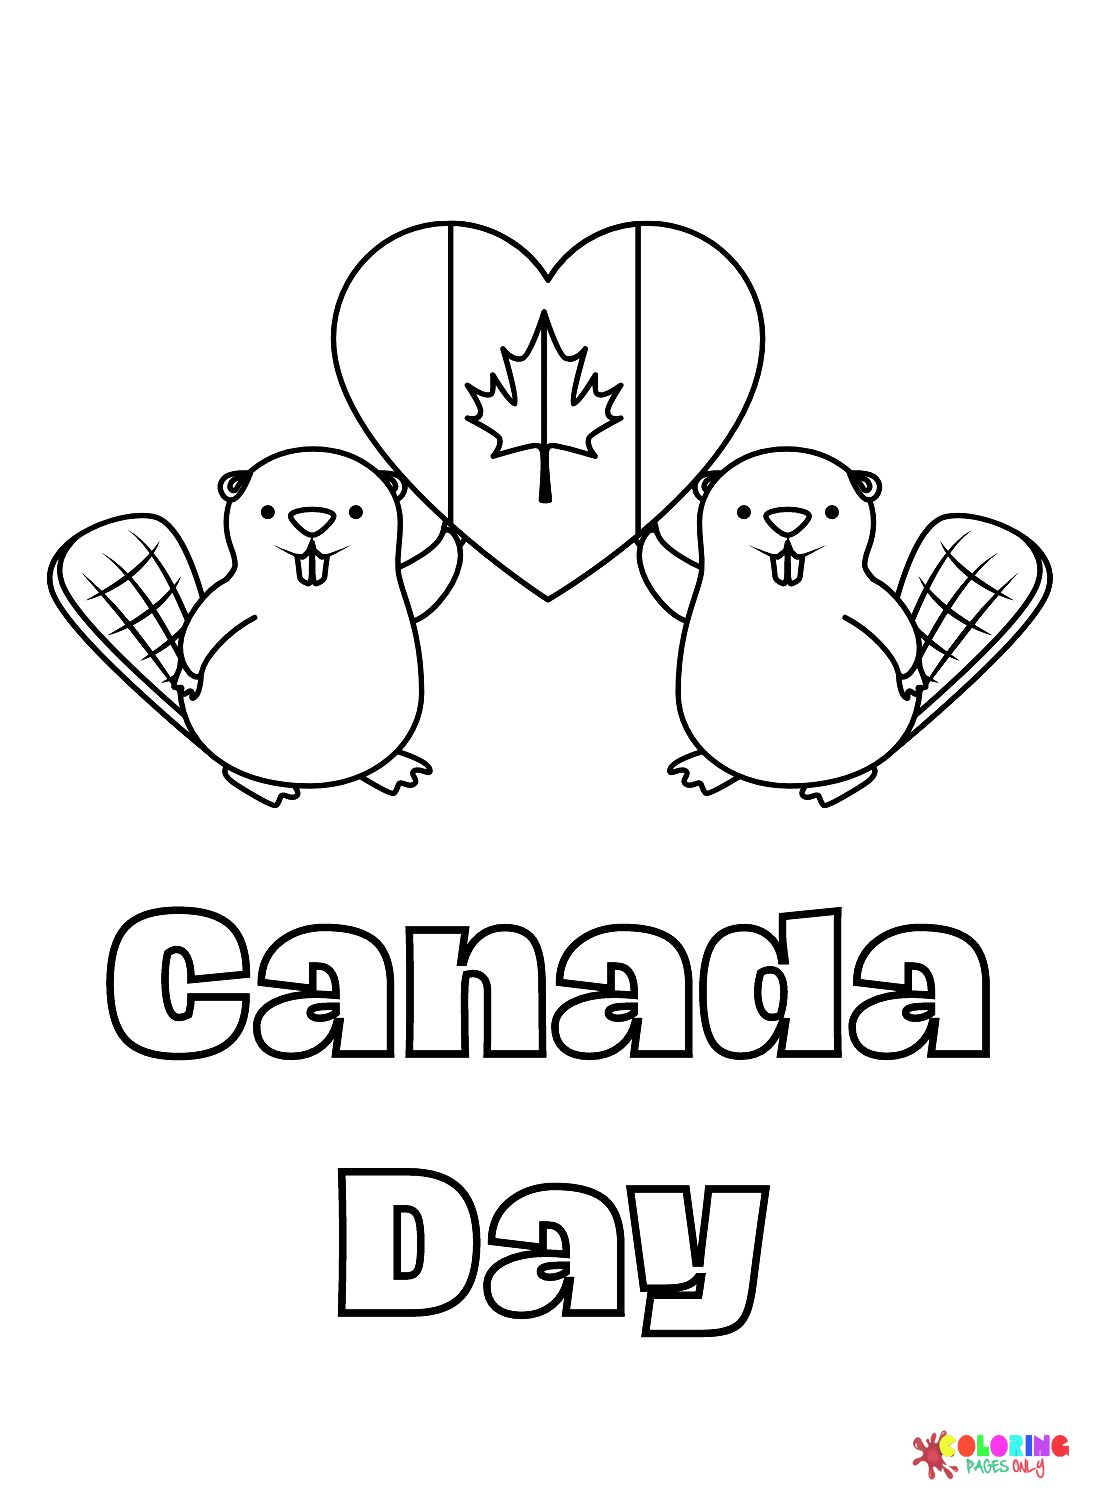 Canadian Flag with Heart Shaped and Beaver from Canada Day